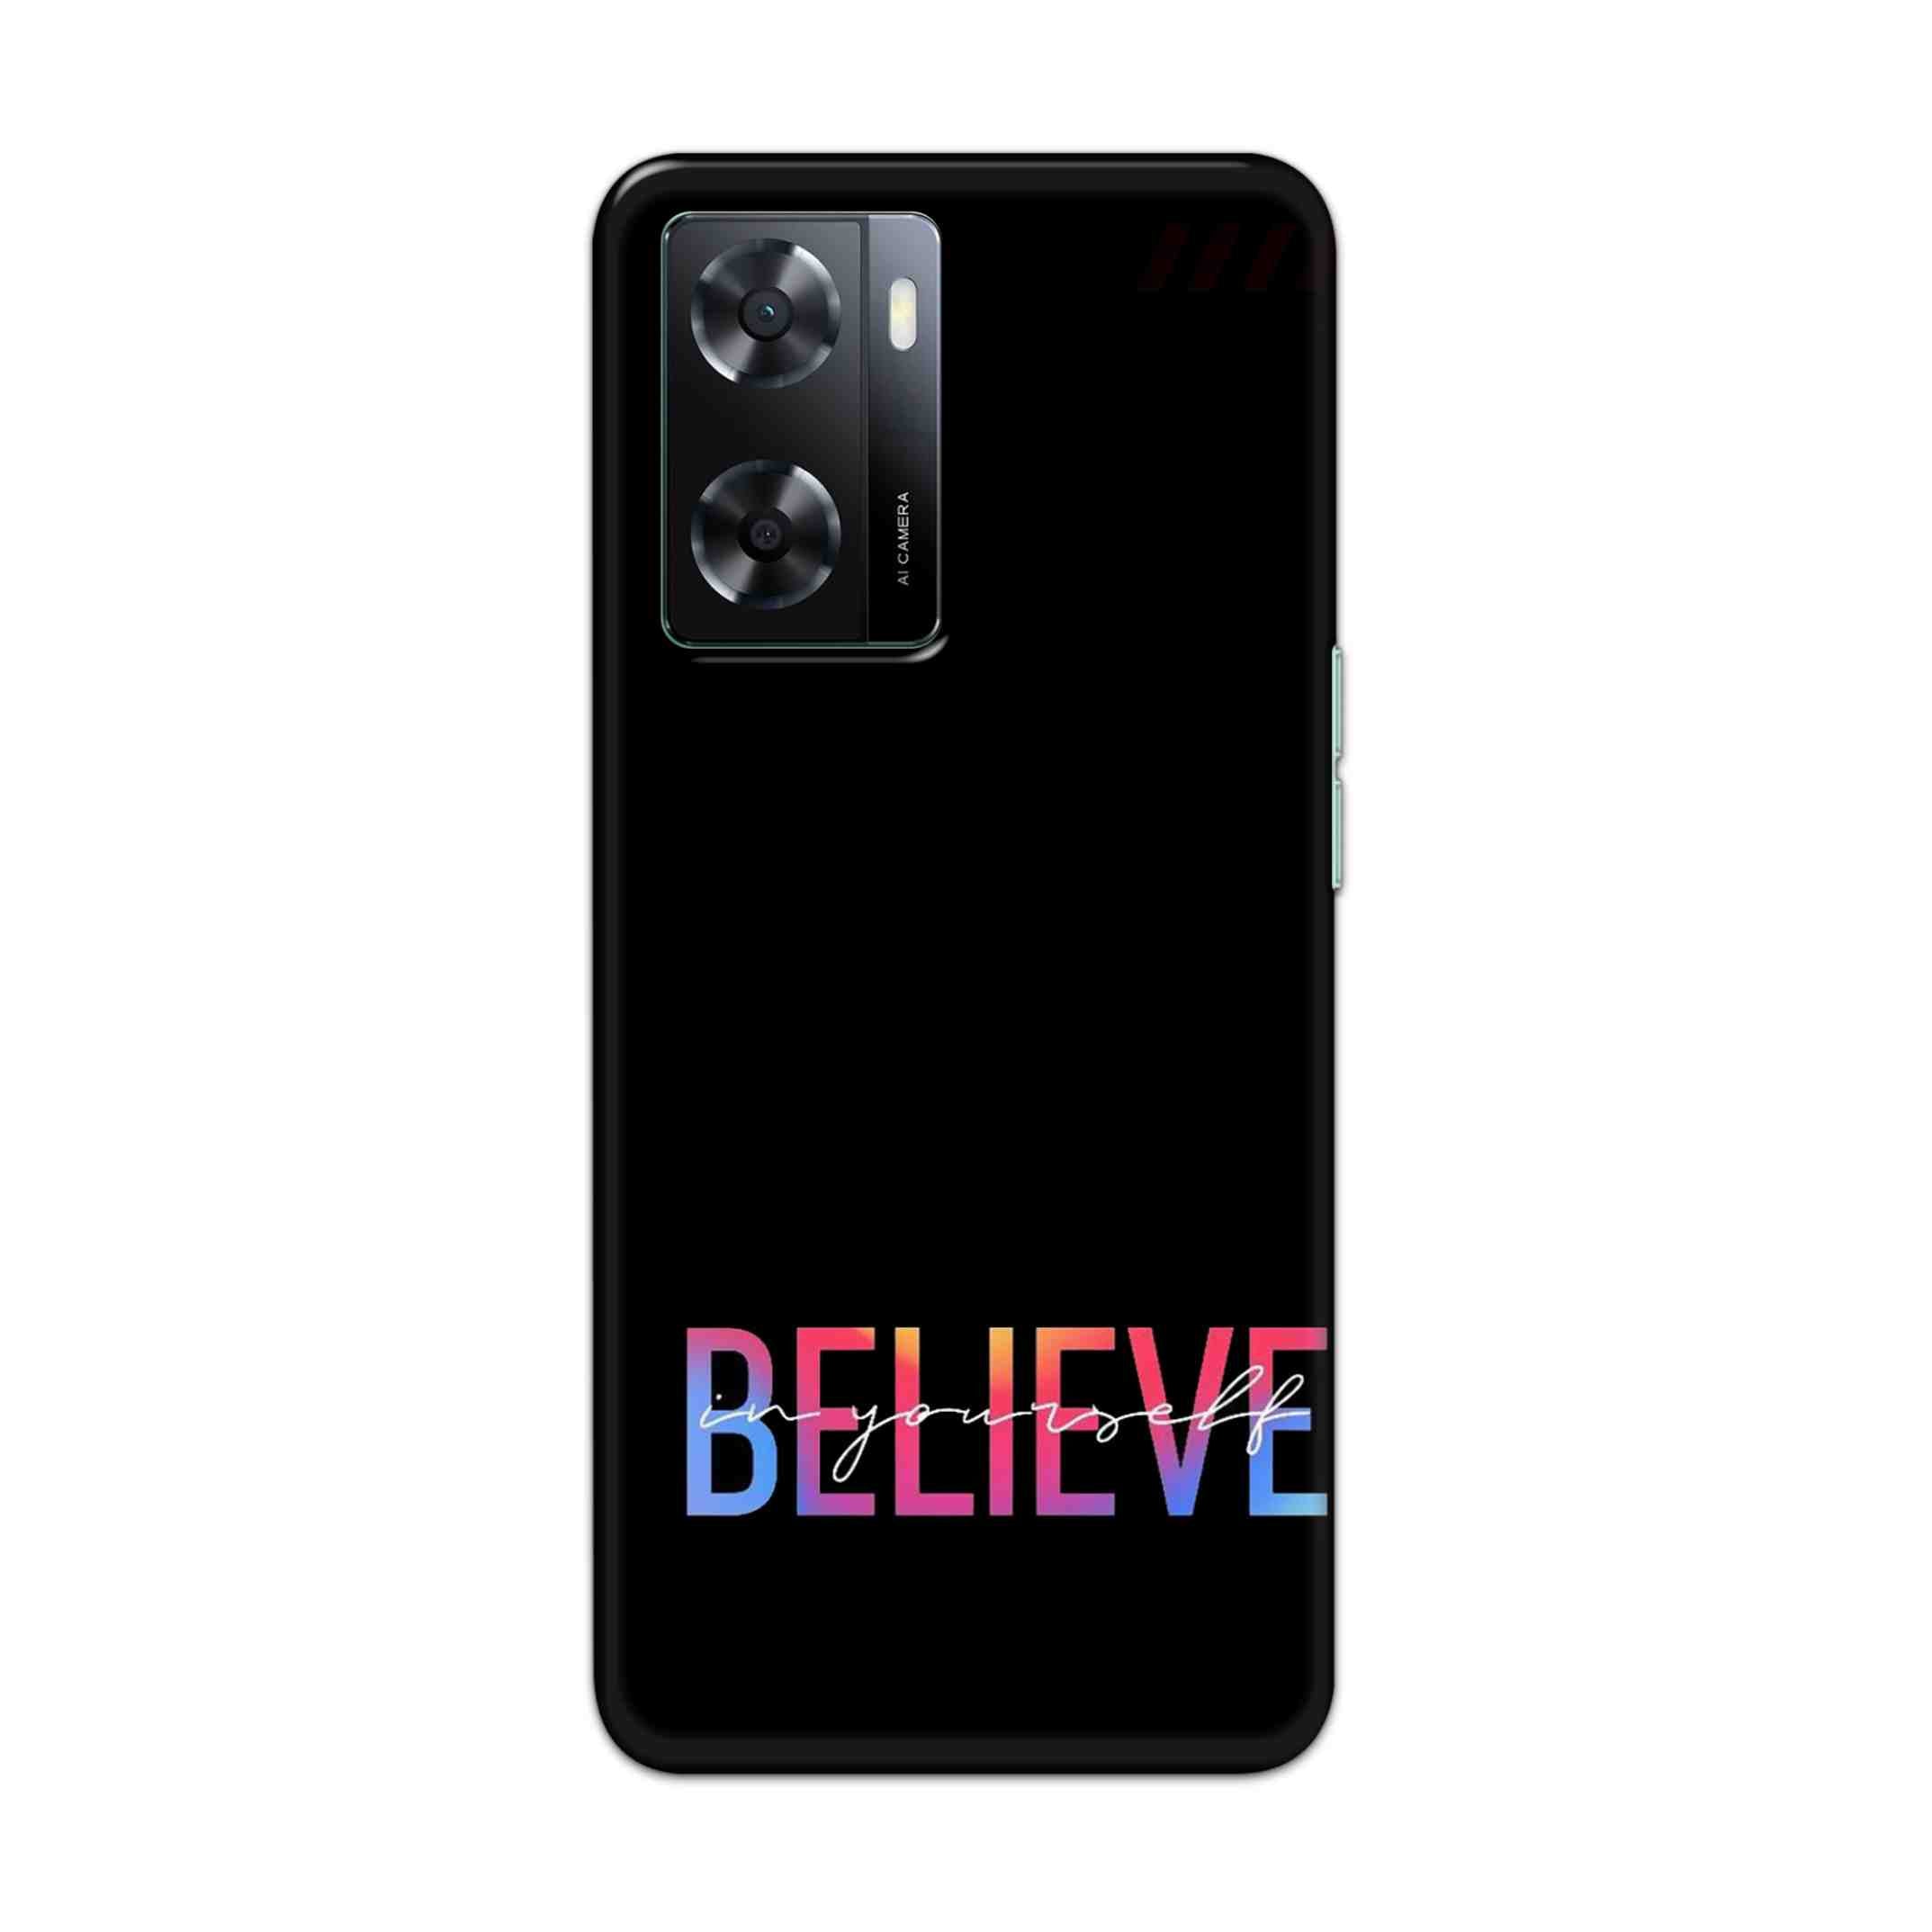 Buy Believe Hard Back Mobile Phone Case Cover For OPPO A57 2022 Online